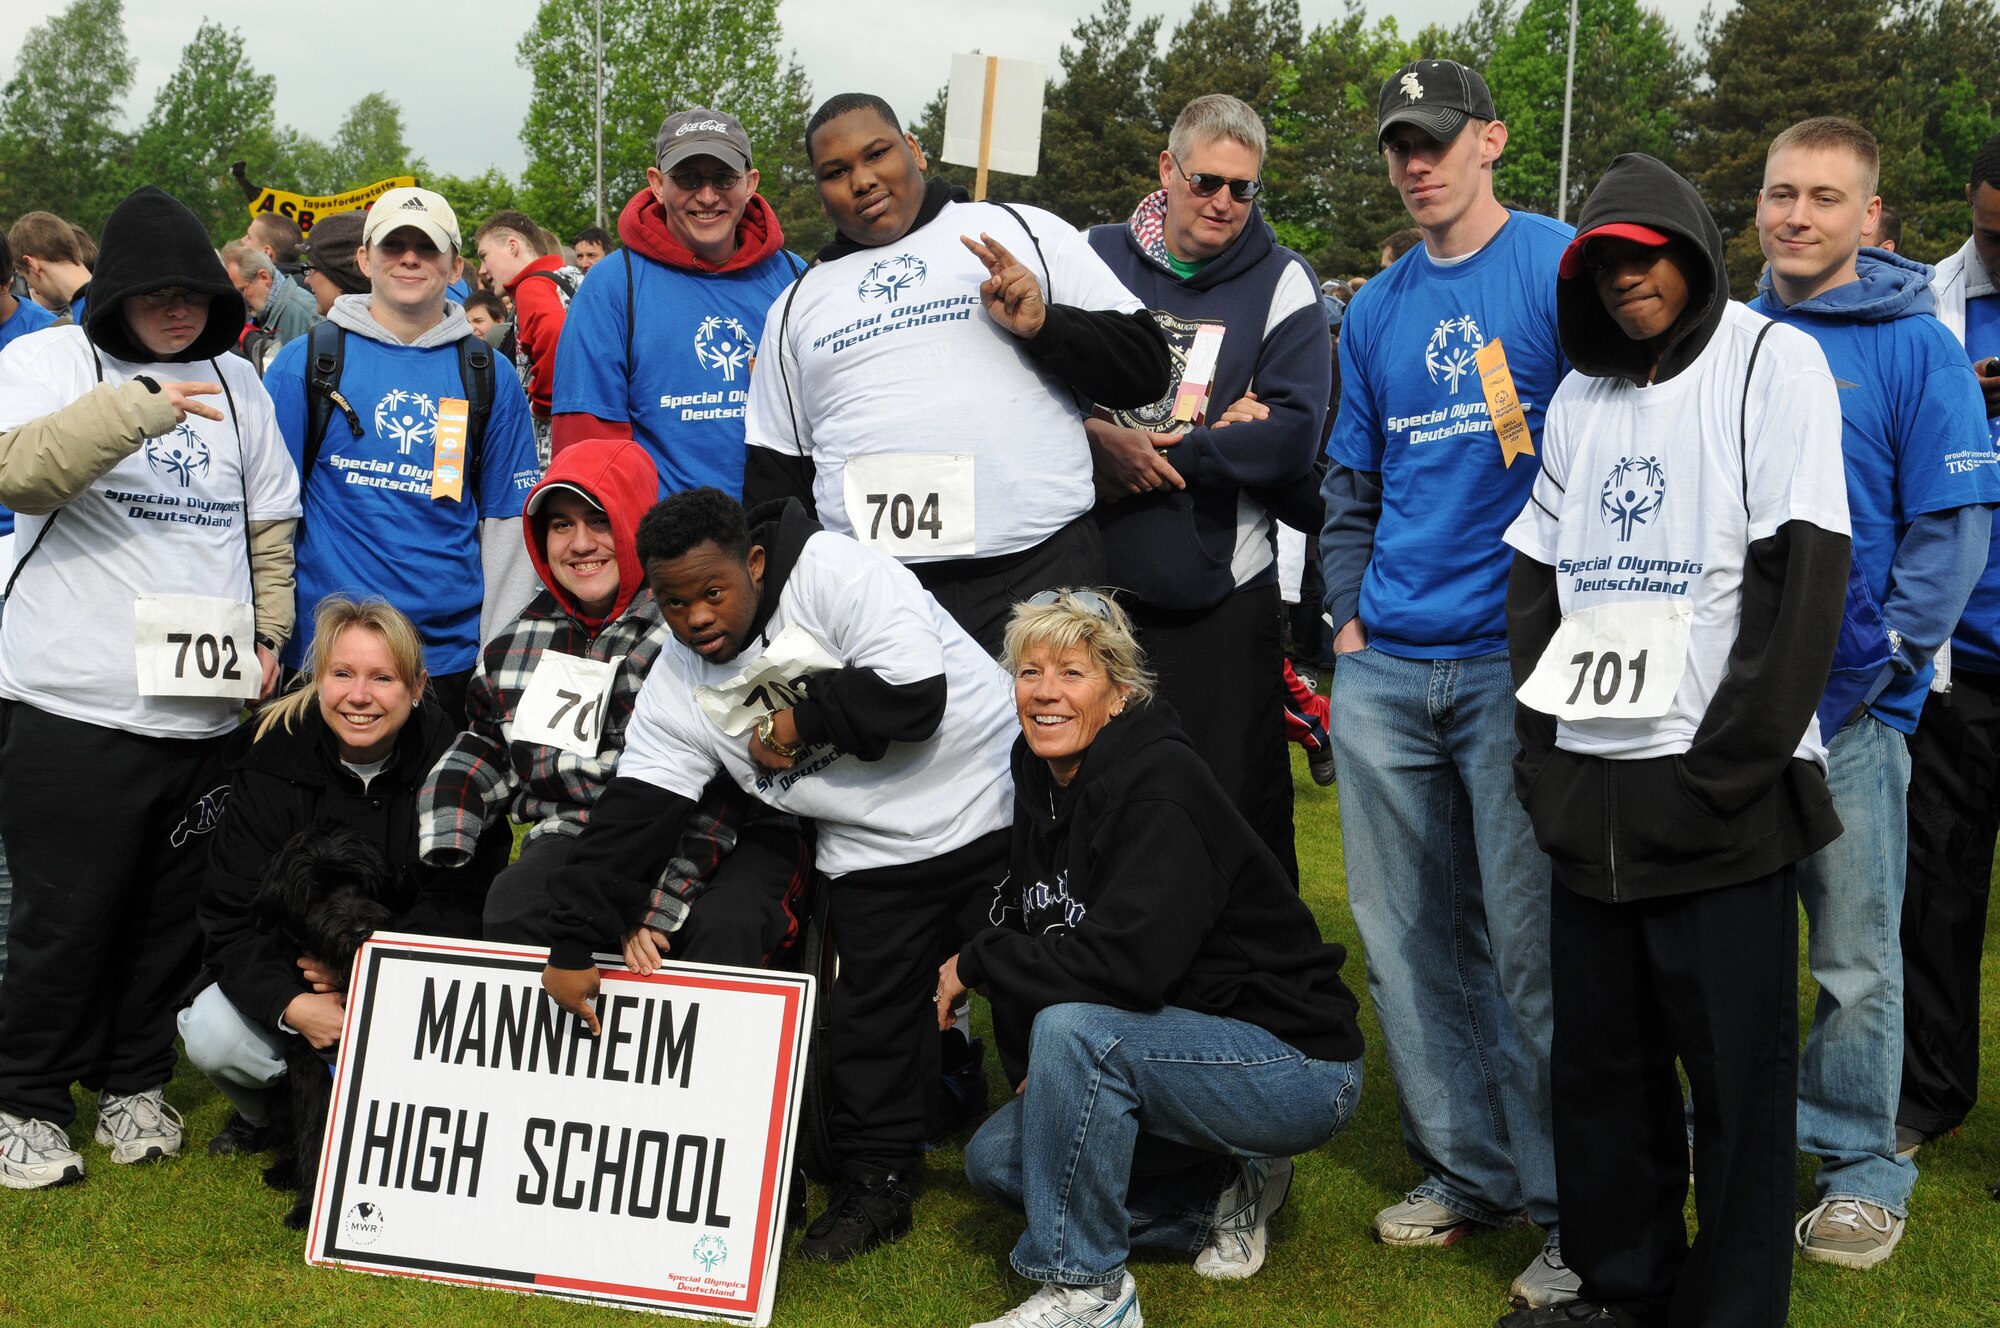 Students, athletes, and athlete buddies pose for a picture during the opening parade at the 36th Annual Special Olympics held in Enkenbach-Alsenborn, Germany, May 6, 2009. Special Olympics is an international program of year-round sports training and athletic competition for more than 1.7 million children and adults with disabilities in more than 150 countries including Germany. (U.S. Air Force photo by Airman 1st Class Grovert Fuentes-Contreras)